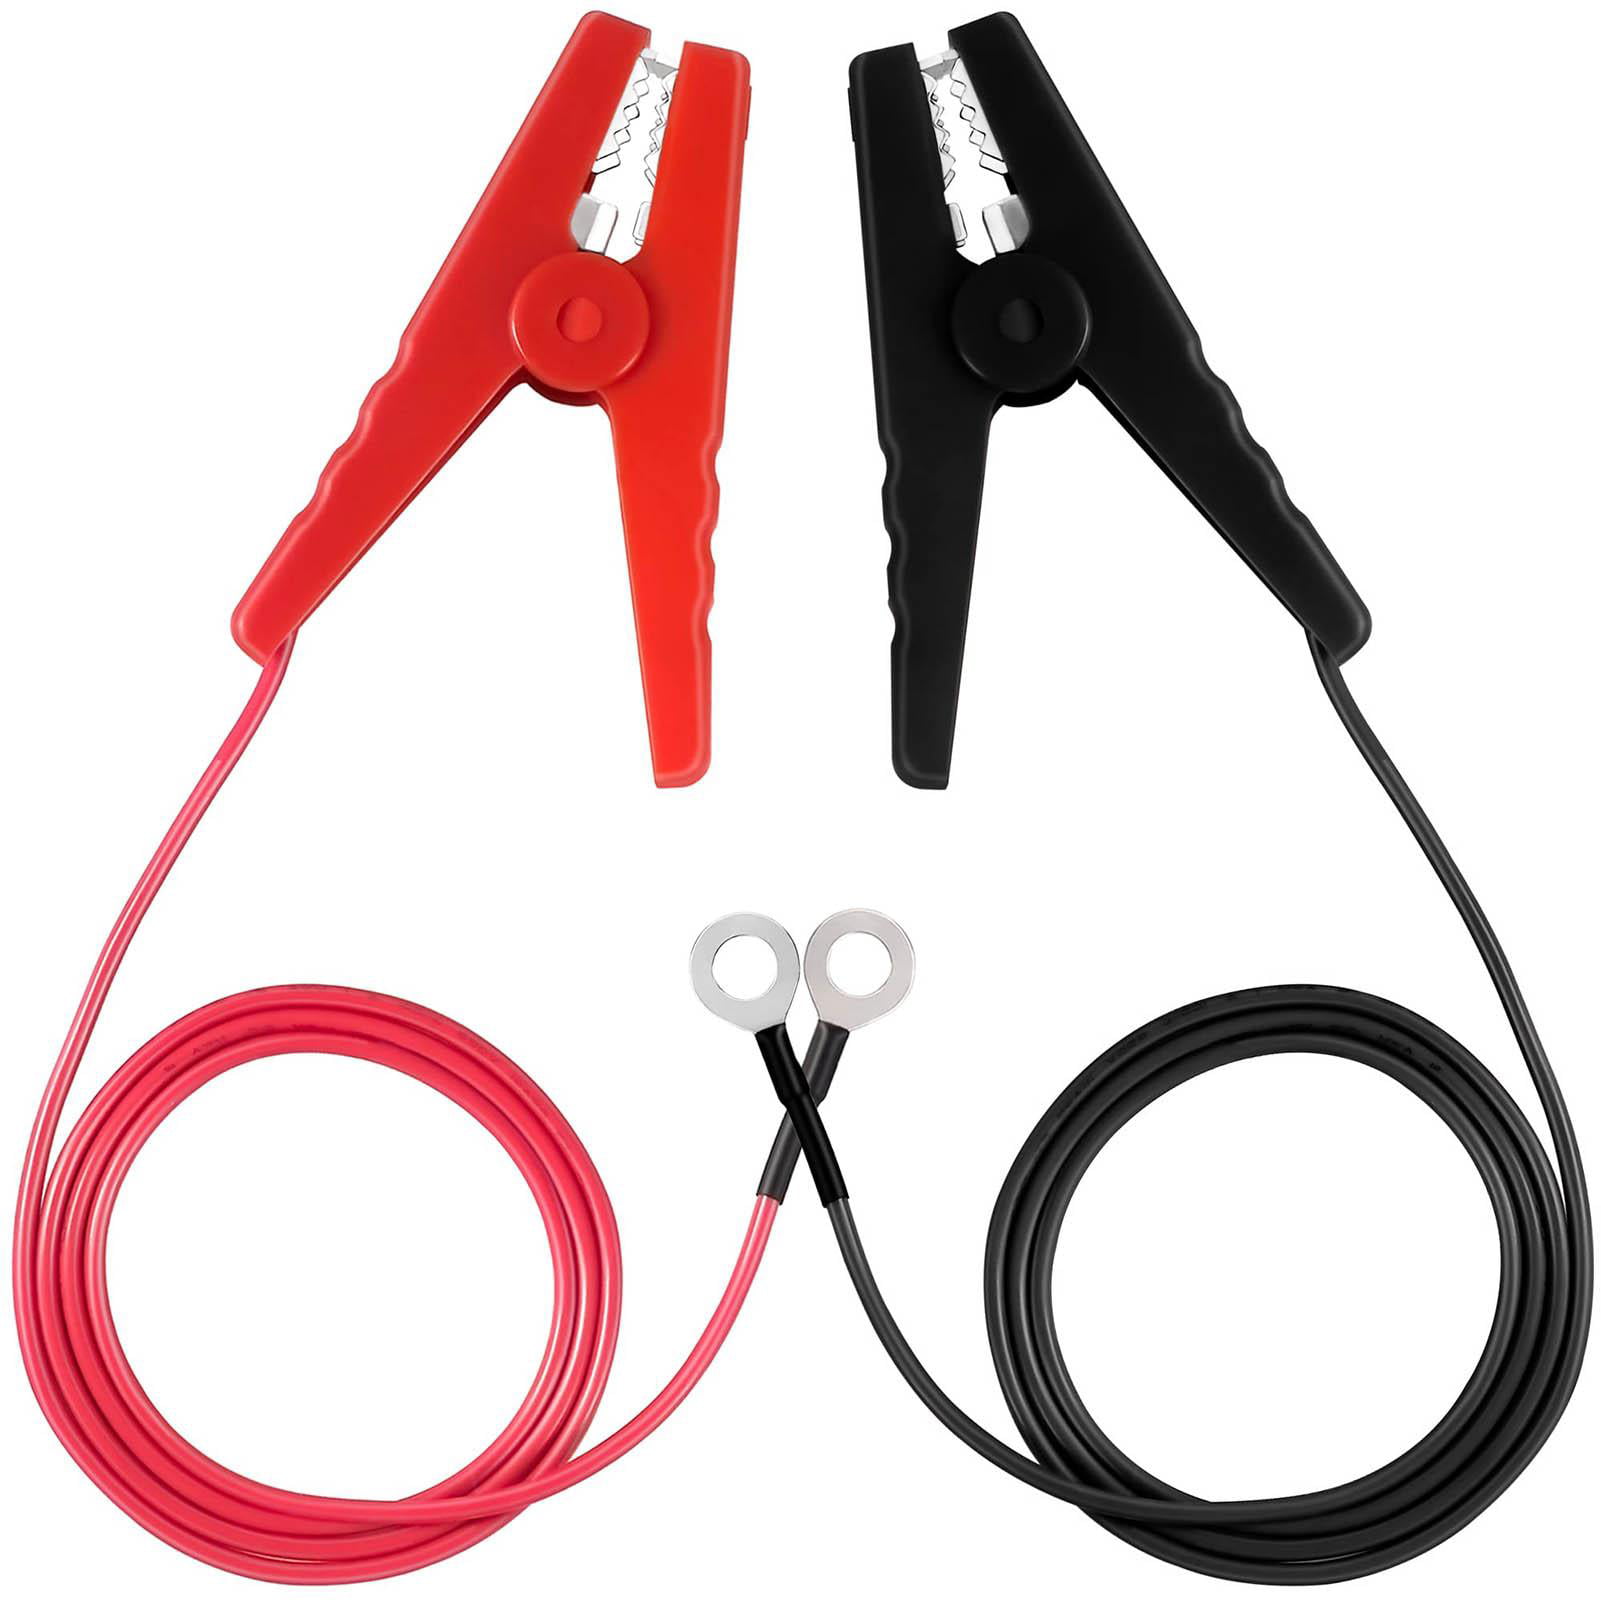 Farmily Jumper Leads with 3 Crocodile Clips for Electric Fence System 